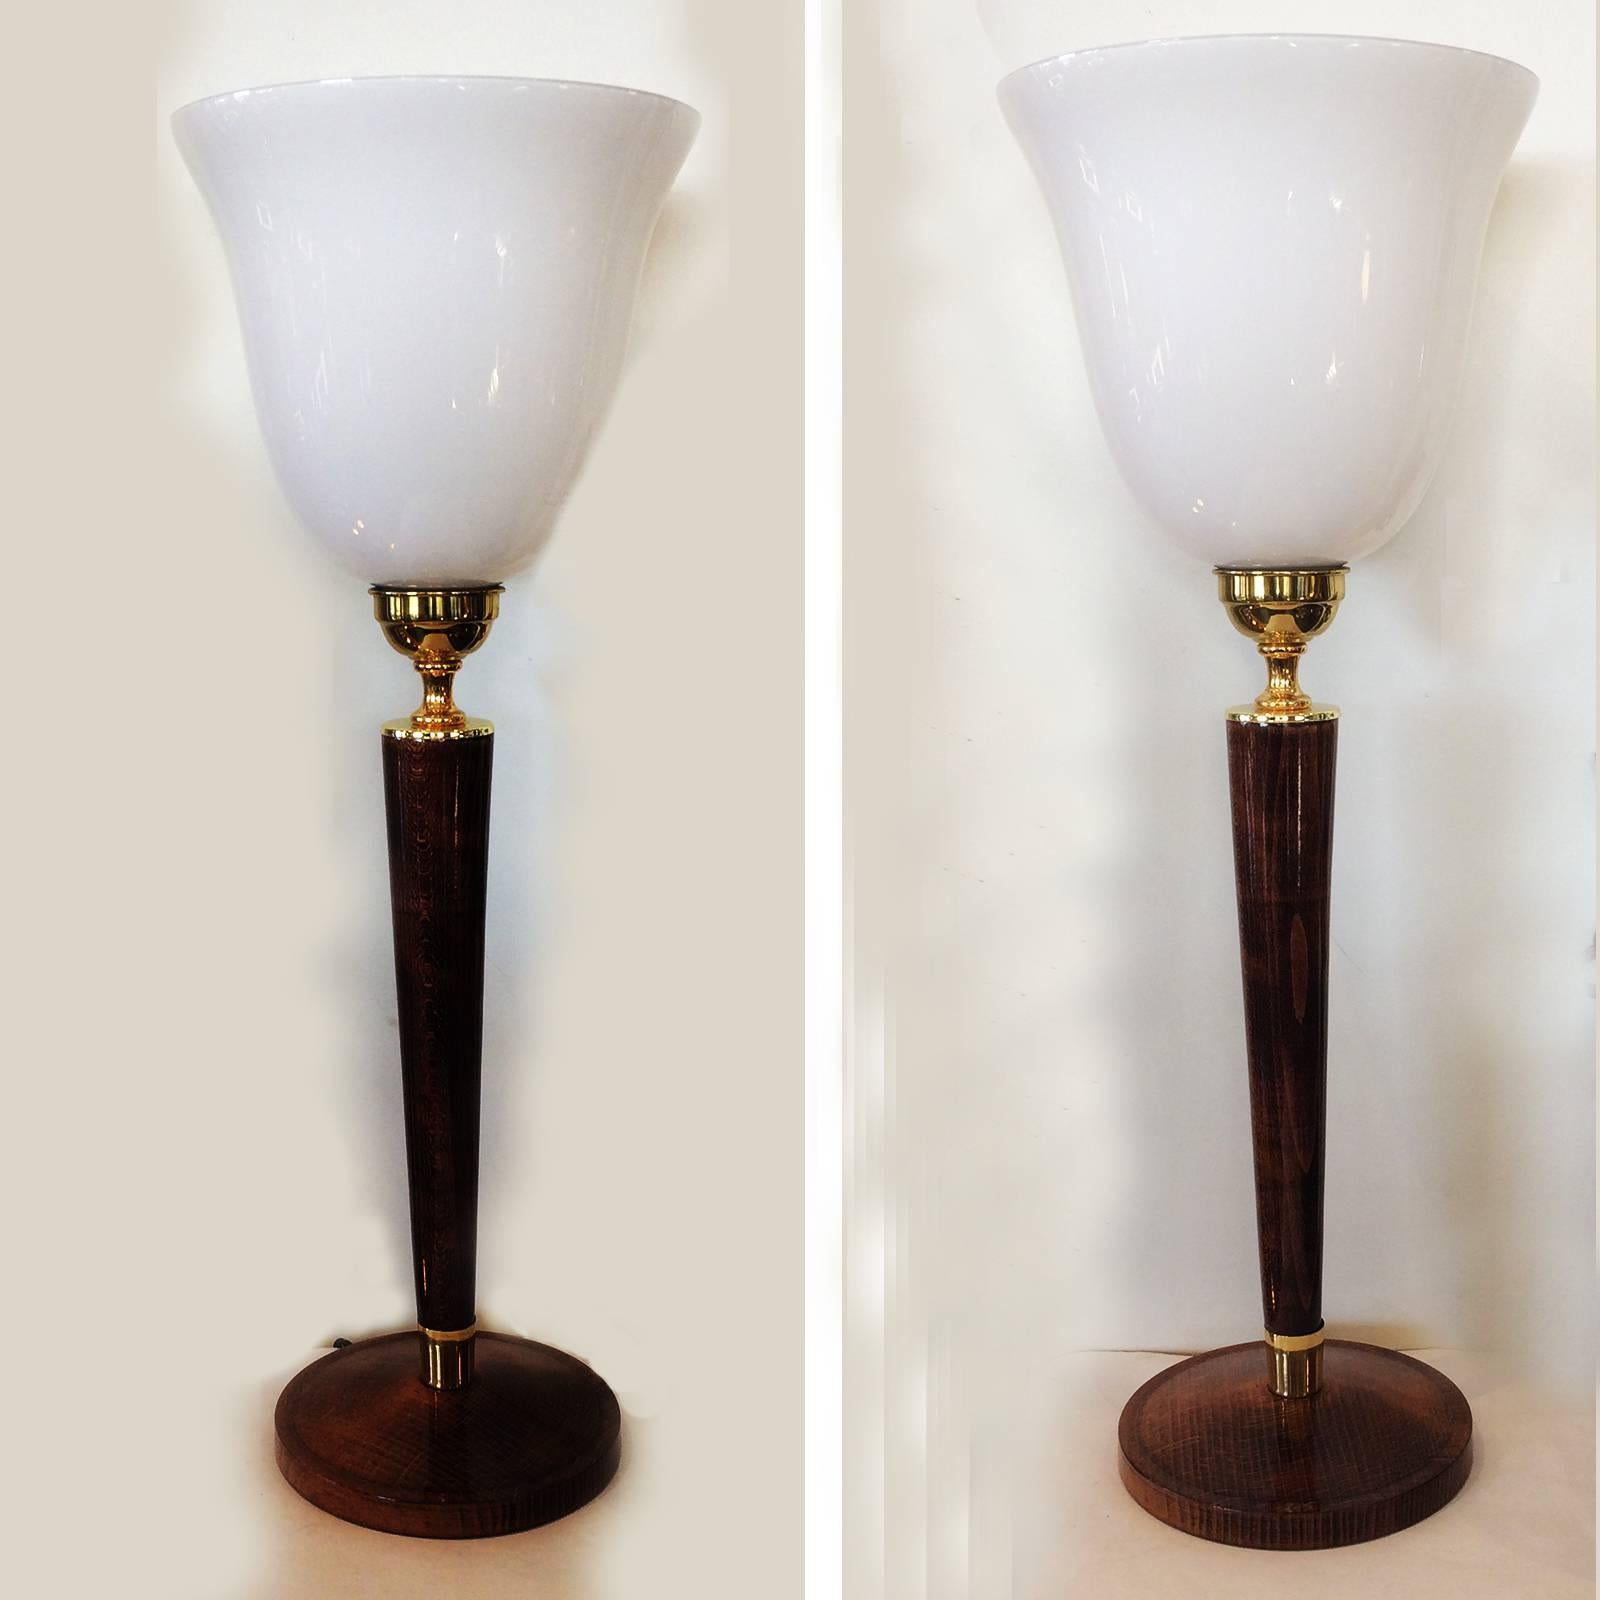 Art Deco pair of lamps by Mazda, France these lamps are immaculate with no damage to either glass, timber or gilt metal fittings. They have an in-line, di-pole safety switch, being re-wired to Australian Regulations, but could easily be converted